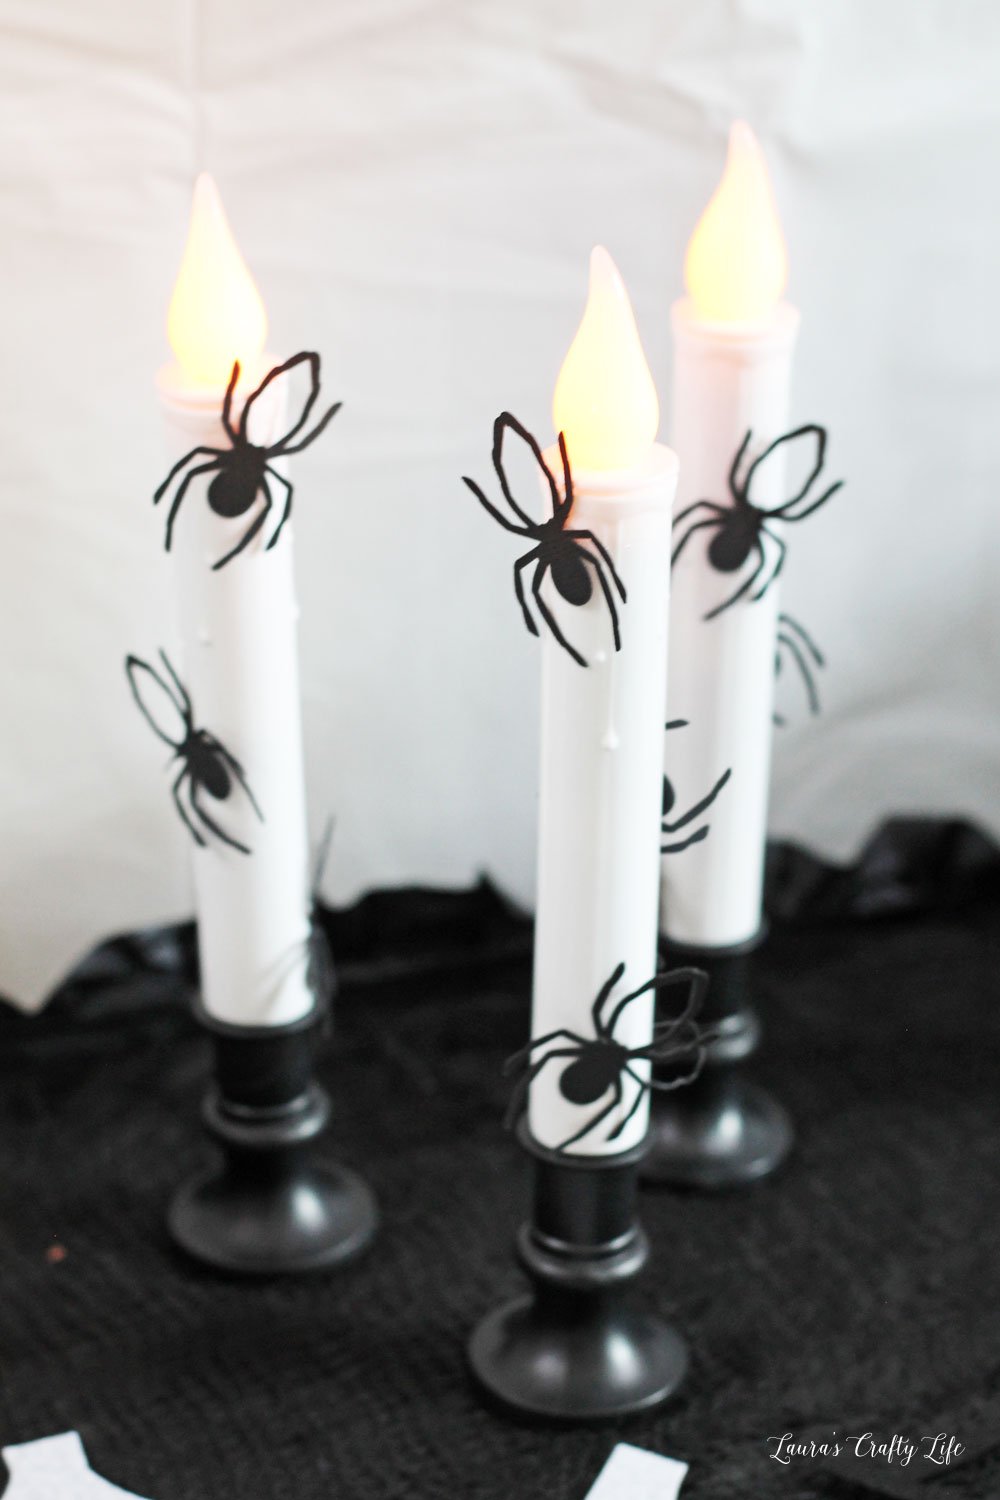 Spider candles made with Cricut Maker